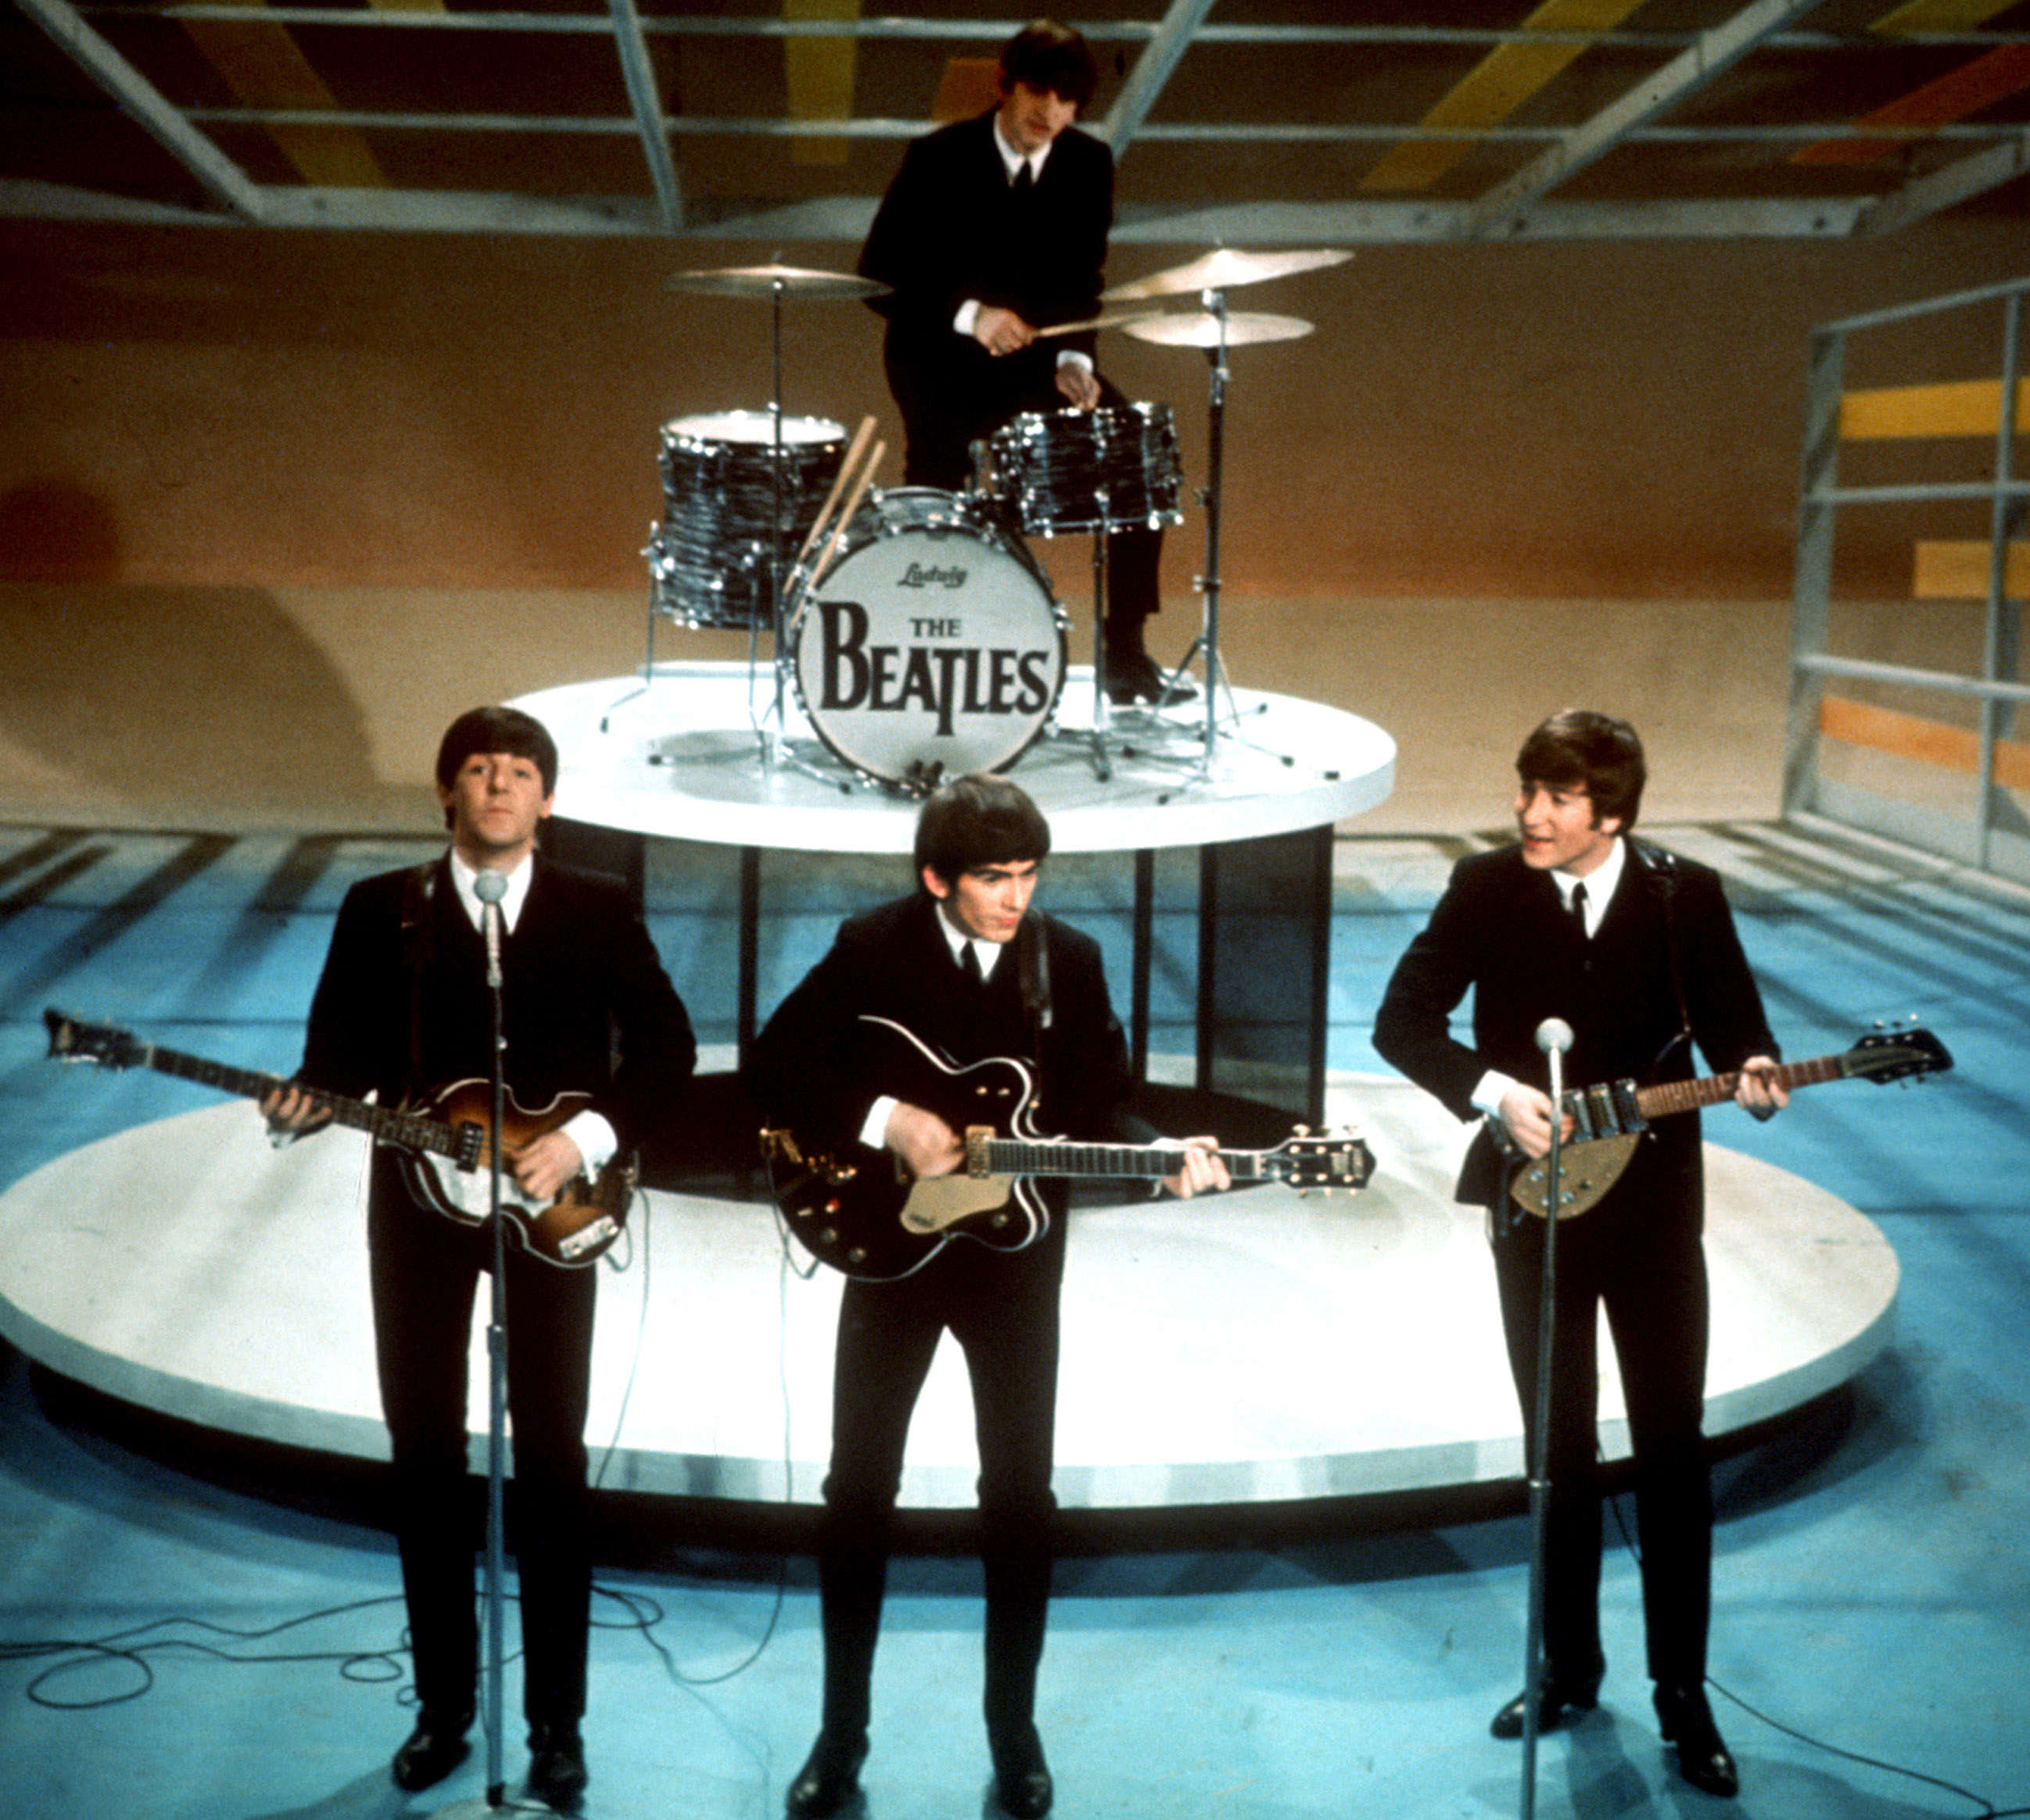 FILE - In this Feb. 9, 1964 file photo, The Beatles perform on the CBS "Ed Sullivan Show" in New York. They love us, yeah! yeah! yeah! At 12:01 a.m. local time on Dec. 24, 2015, around the world, the Beatles' music will be available for streaming from a wide range of outlets, a representative announced Wednesday, Dec. 23. (AP Photo, File)